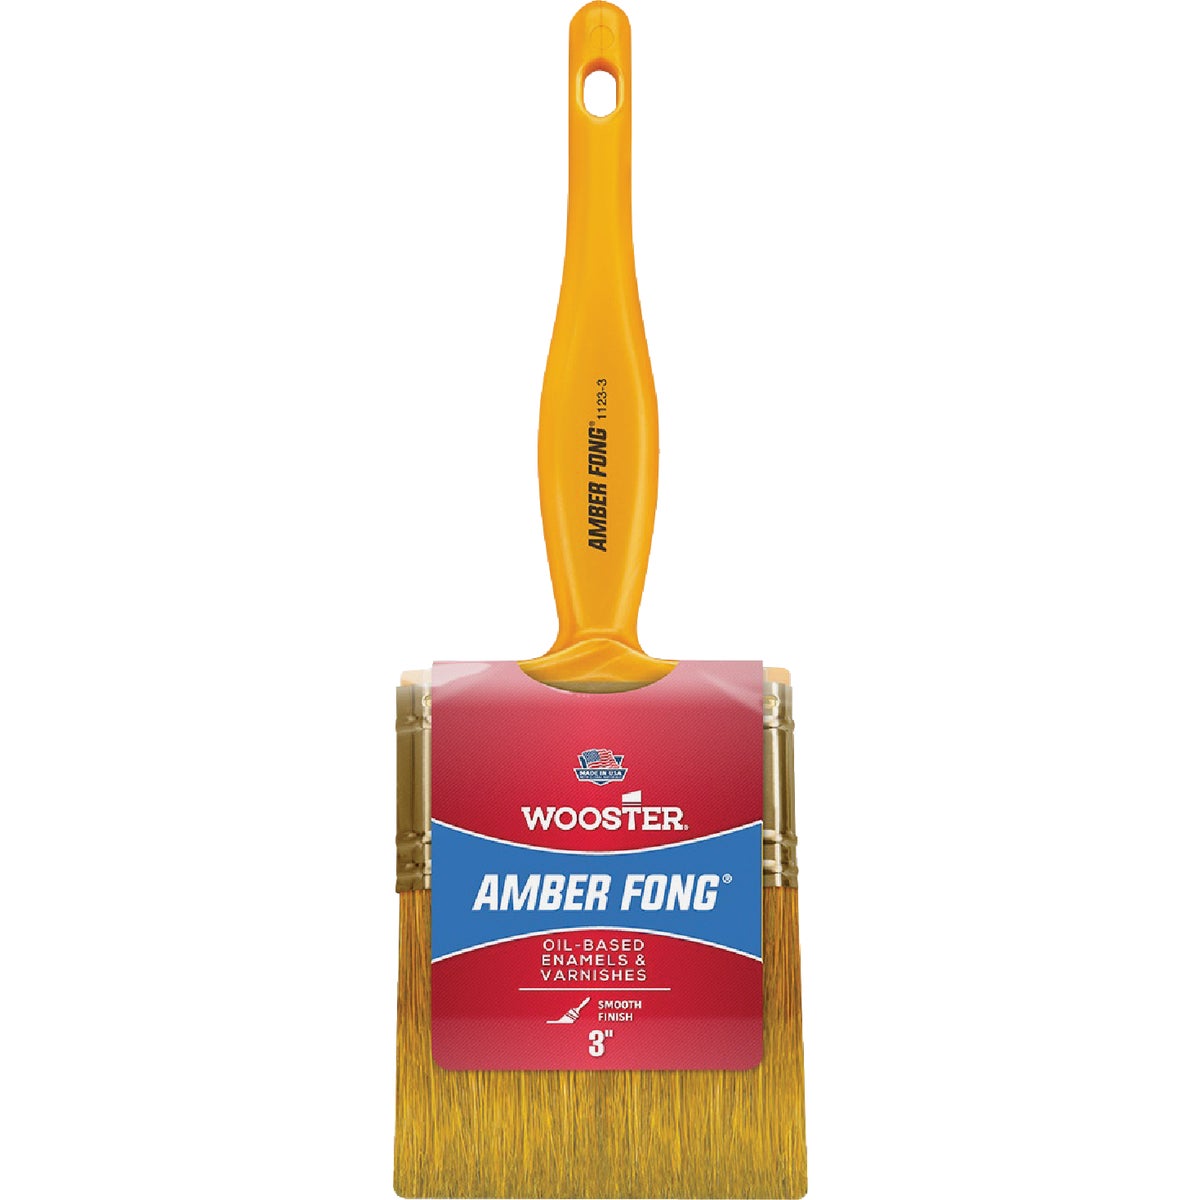 Item 770338, Soft, amber-brown bristles provide a smooth finish with all oil-based 